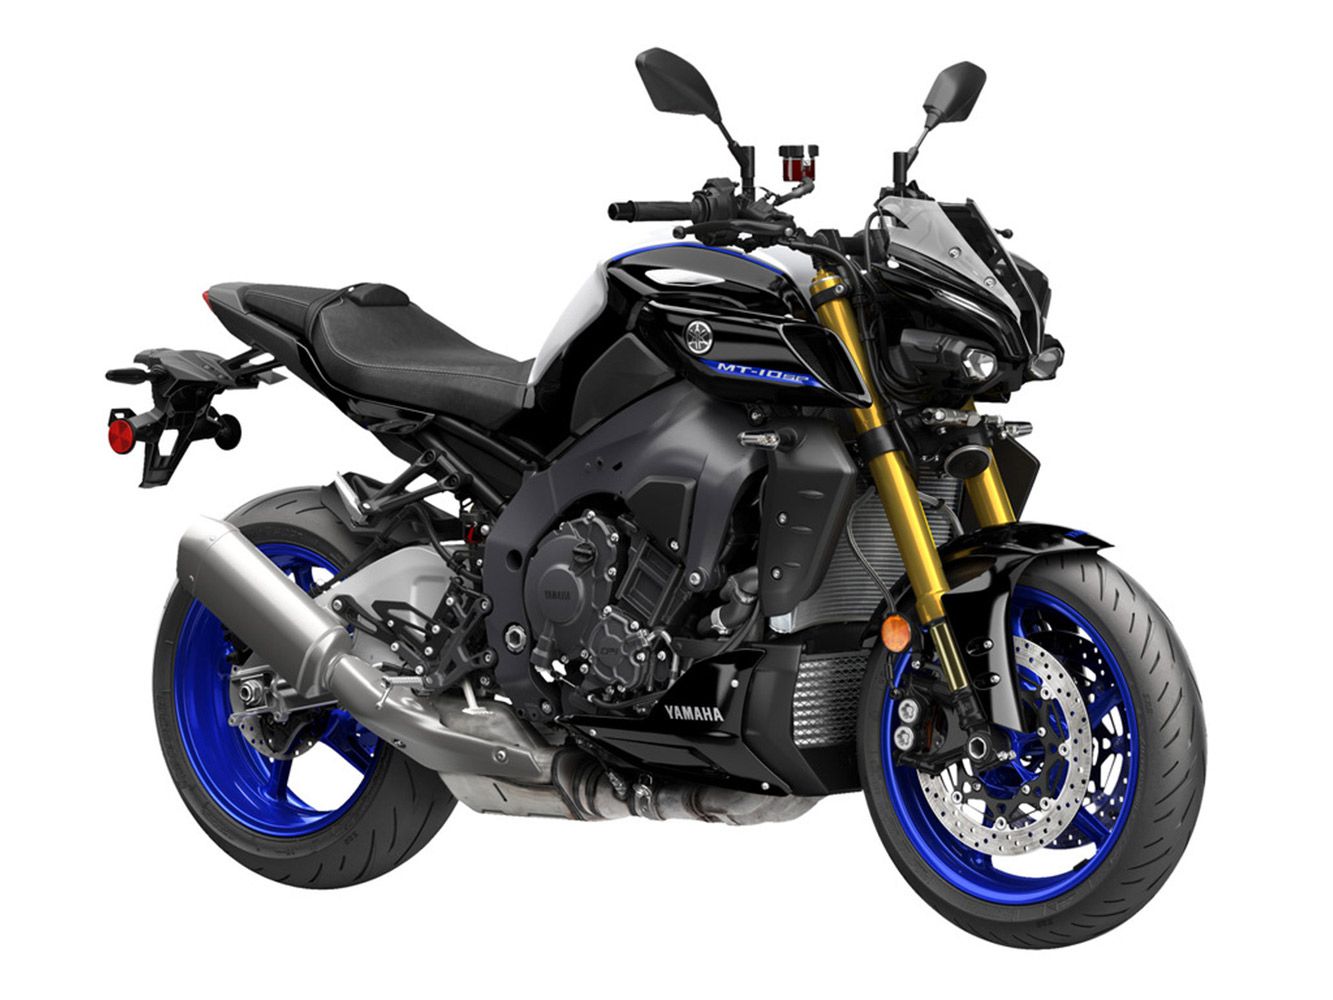 The MT-10 SP benefits from Öhlins semi-active suspension and comes in a YZF-R1M-inspired Liquid Metal/Raven color scheme. Other upgrades include steel braided brake lines.